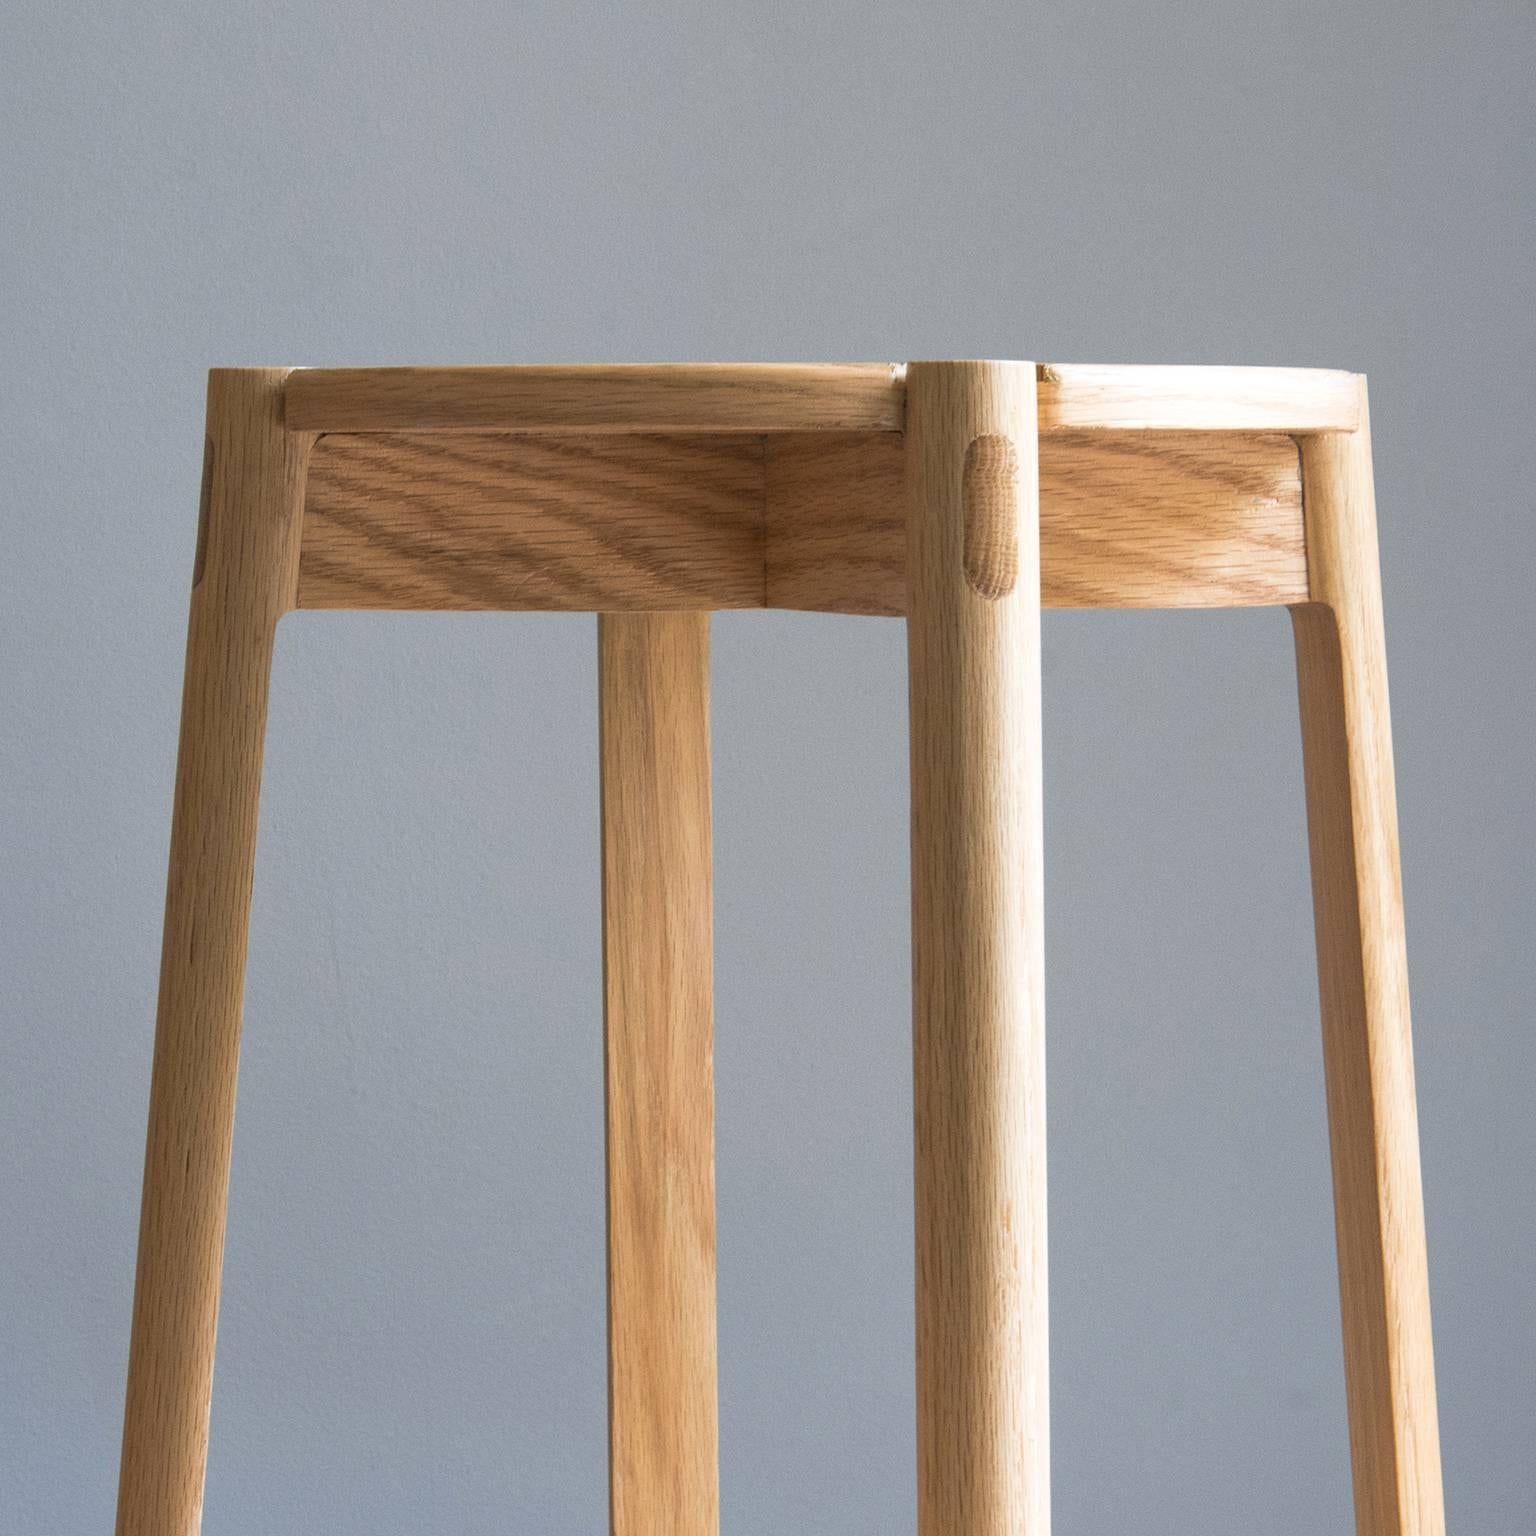 Modern Contemporary Danish Style Wooden Stool For Sale